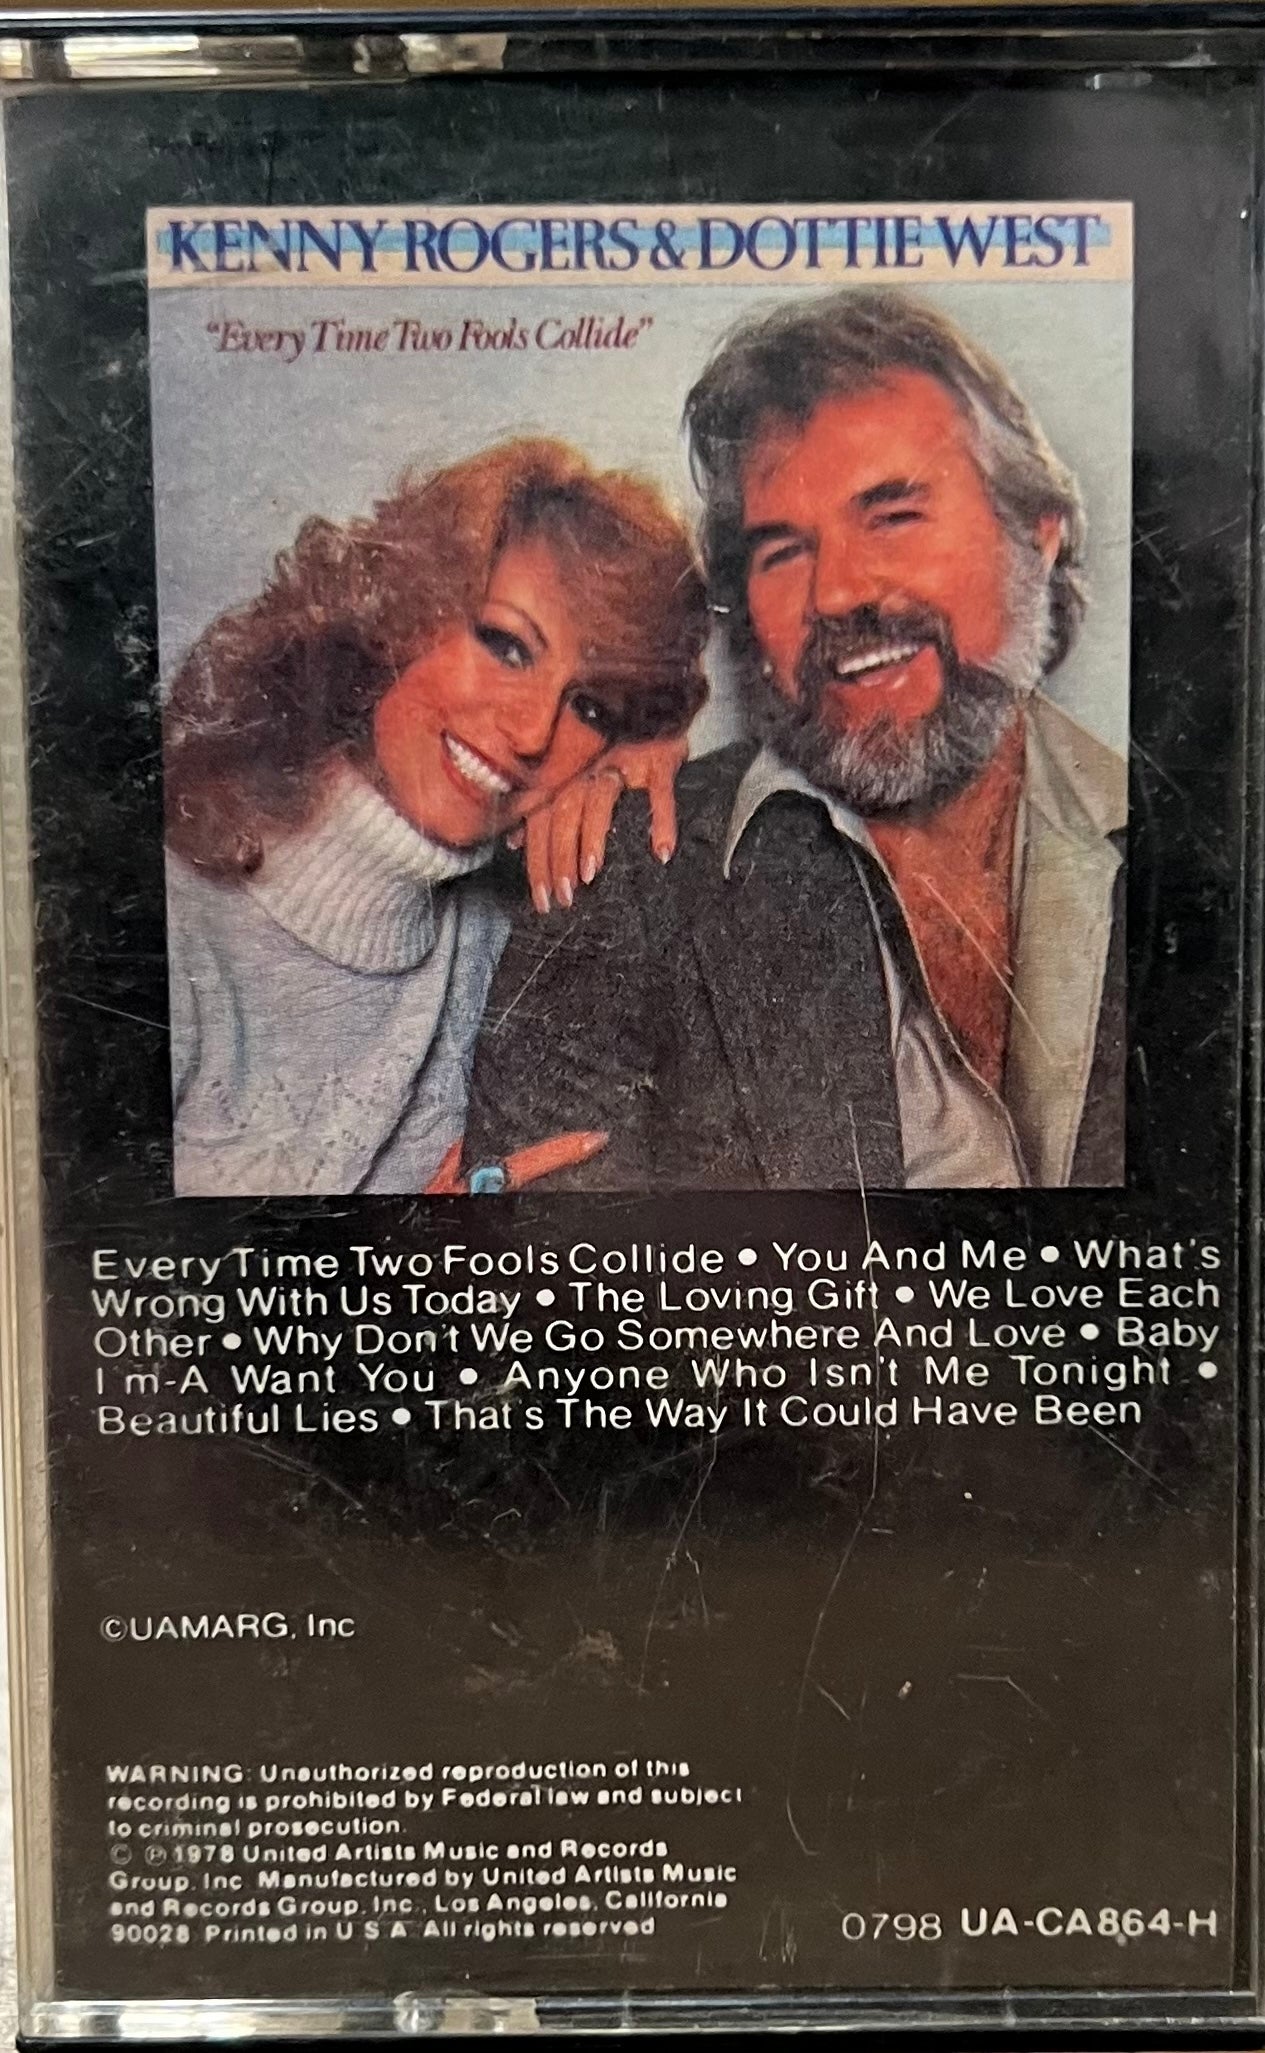 Kenny Rogers & Dottie West- Every Time Two Fools Collide